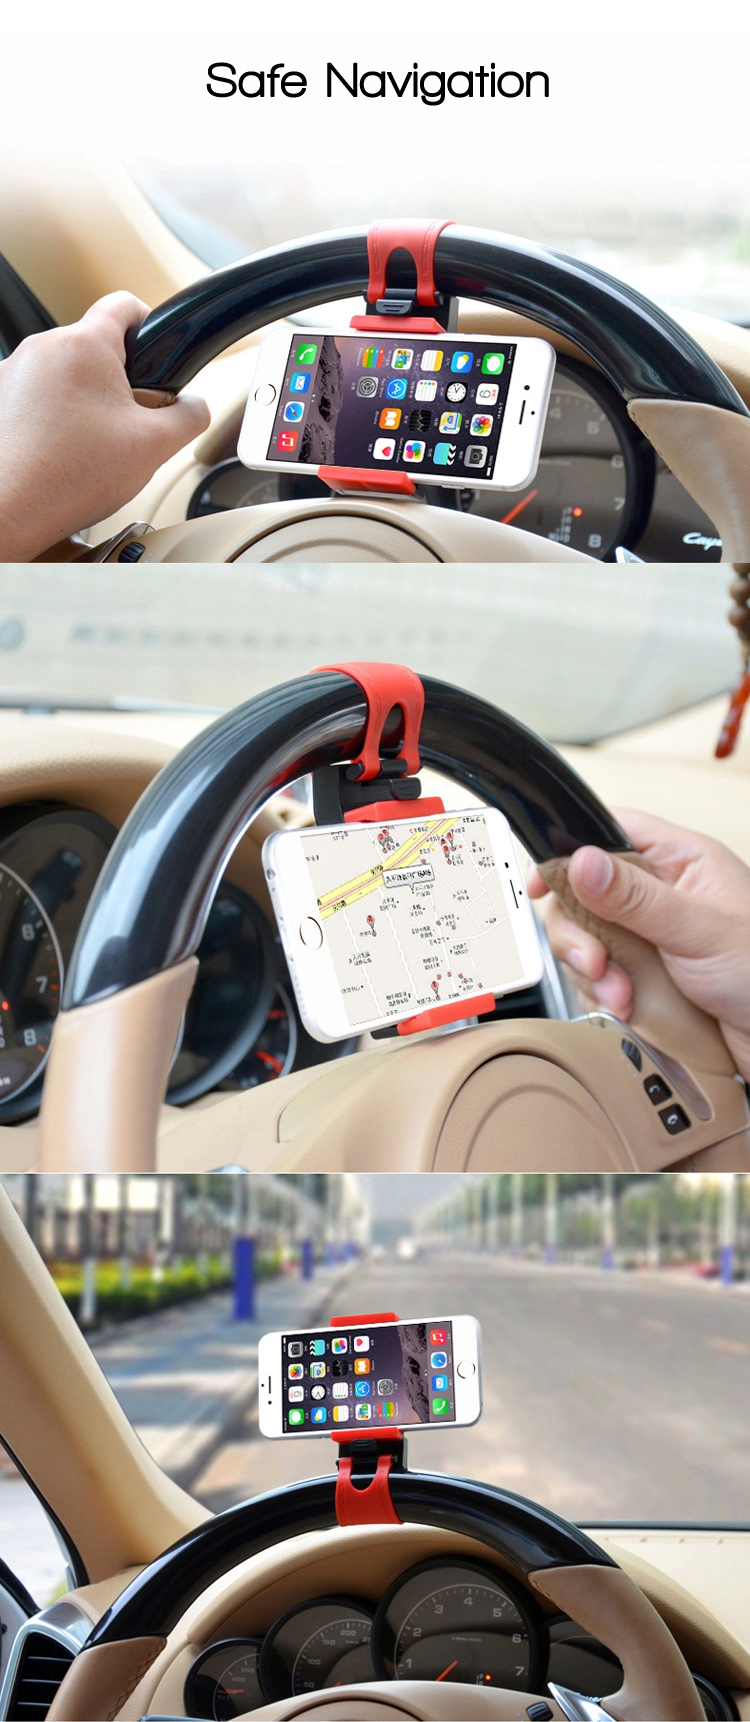 Universal-Mobile-Phone-Stand-Holder-Mount-Clip-Buckle-Socket-on-Car-Steel-Ring-Wheel-for-iPhone-6-Pl-1124541